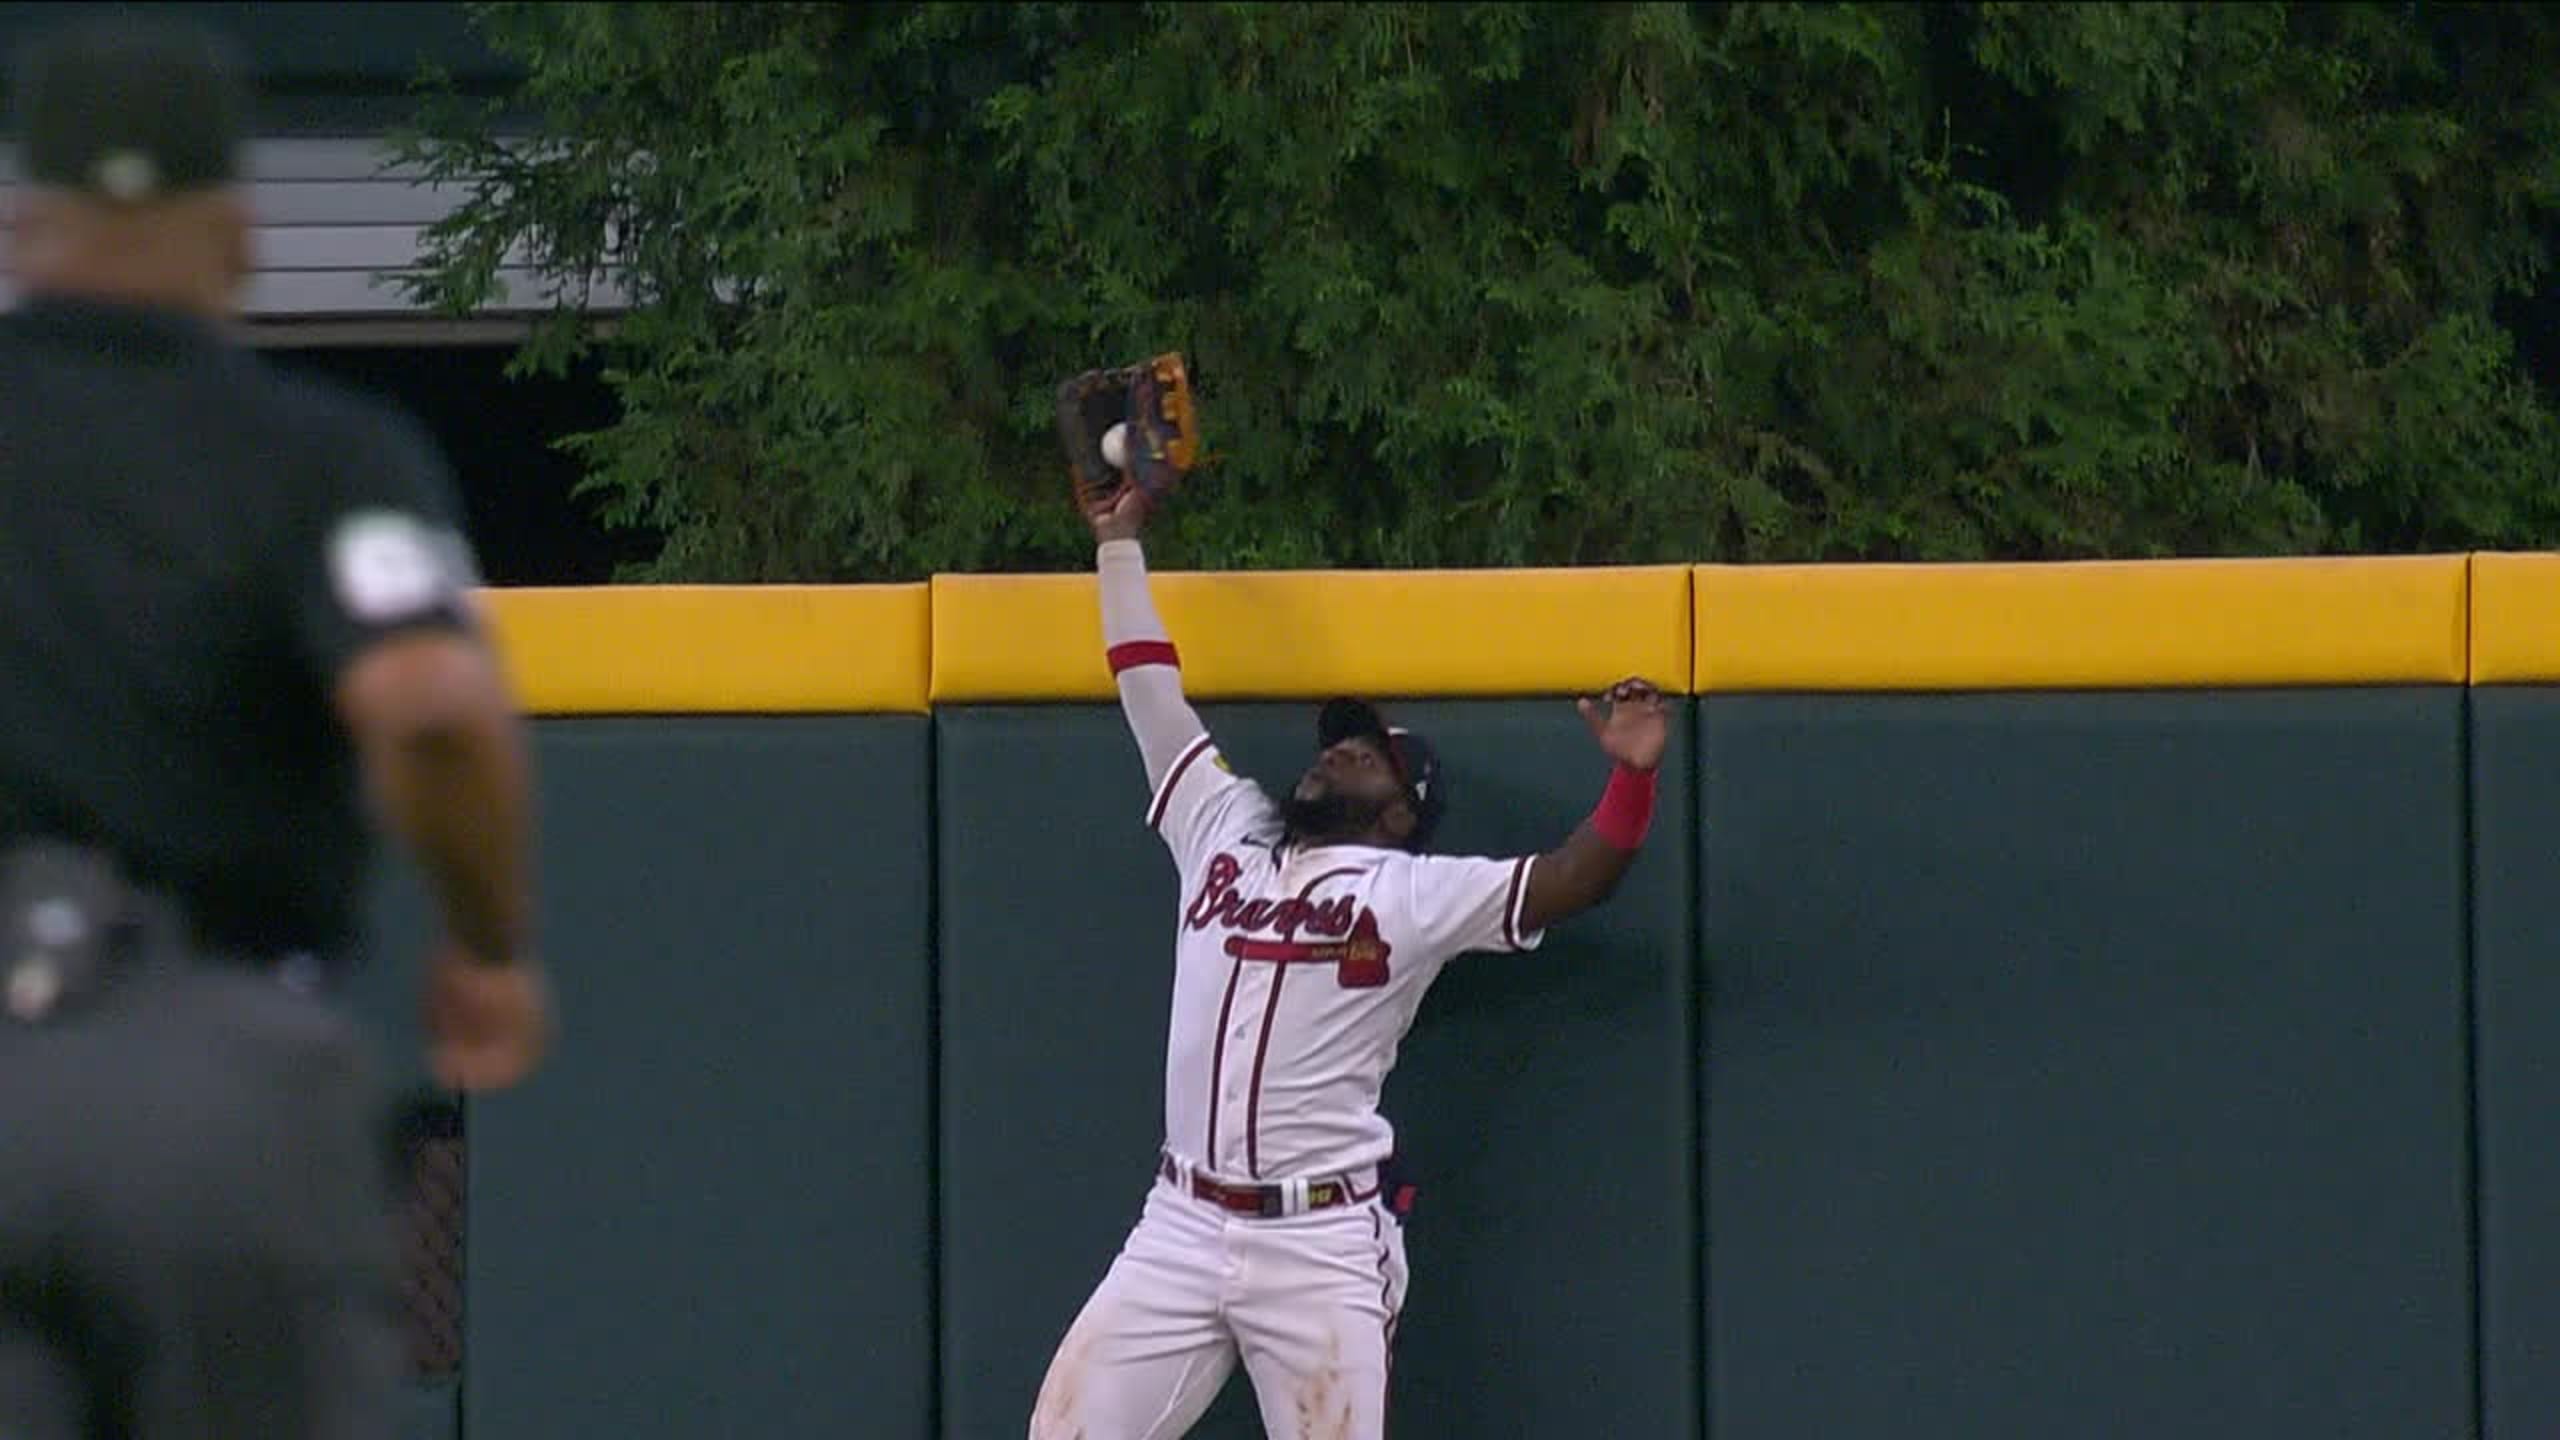 Marcell Ozuna bashes a monster home run off the scoreboard